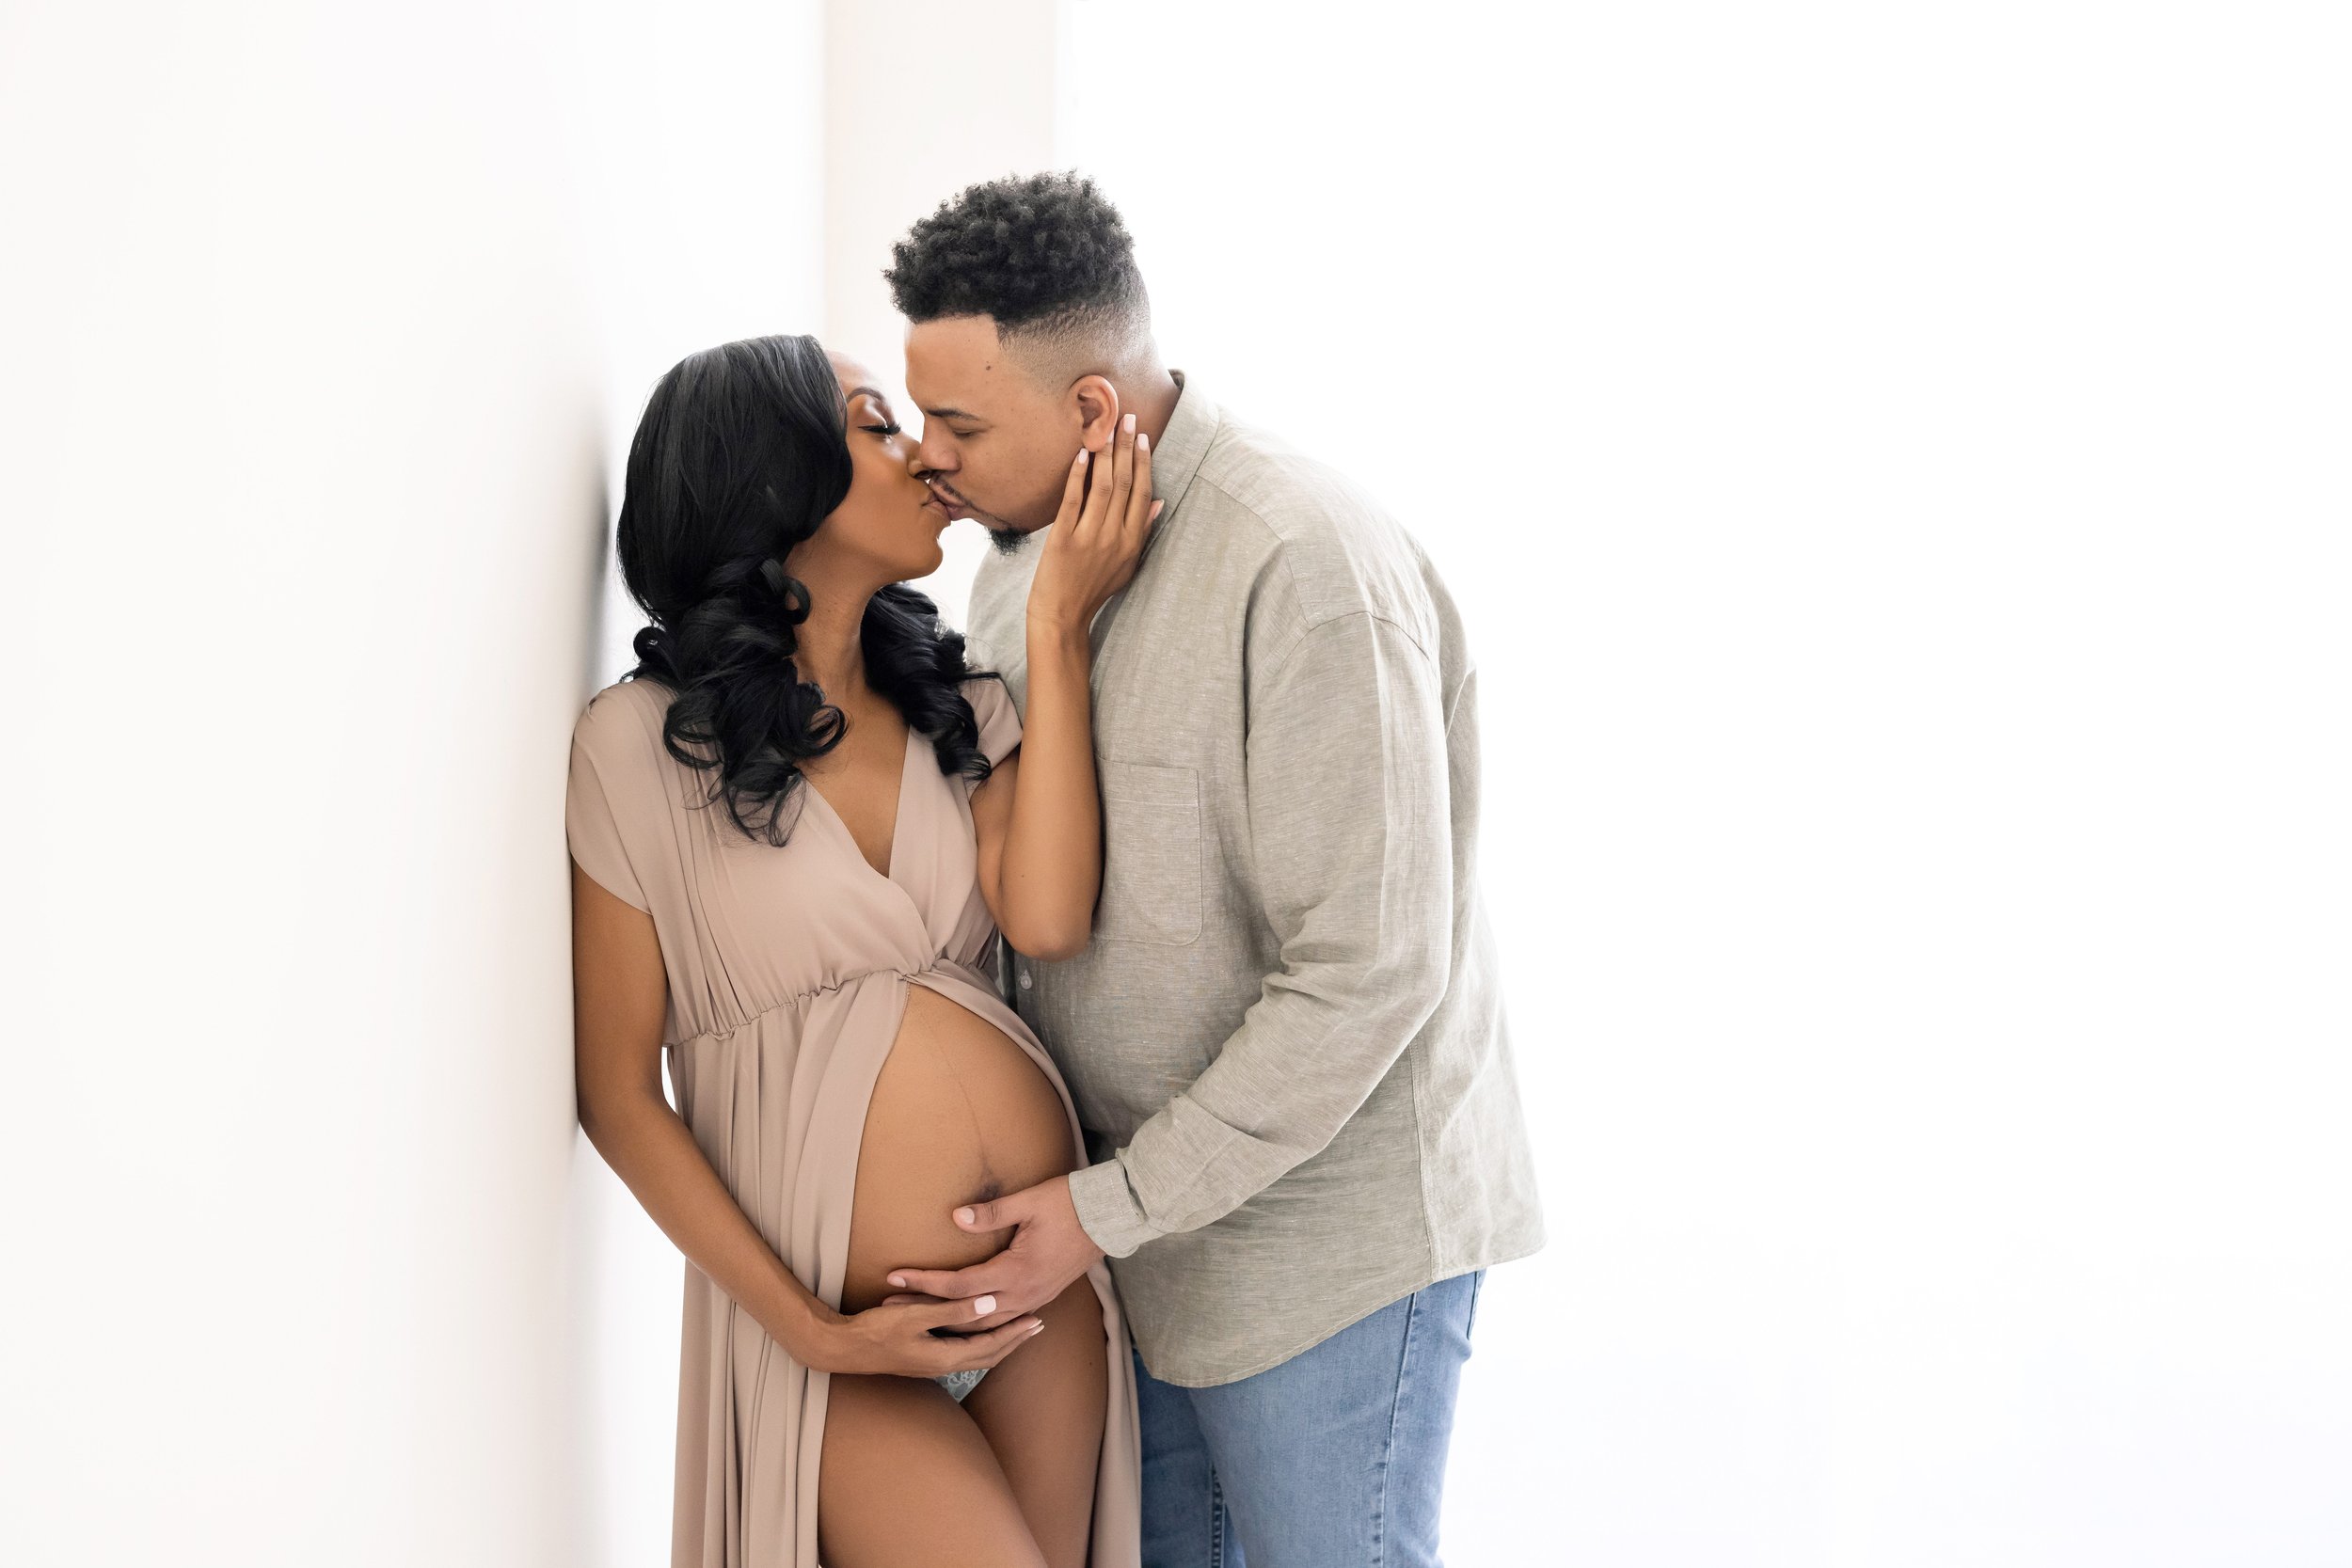  Maternity photo of an African-American couple with the pregnant woman wearing a split-front full-length gown exposing her pregnant belly as her husband stands by her side and kisses her while they place their hands on their child in utero taken in a